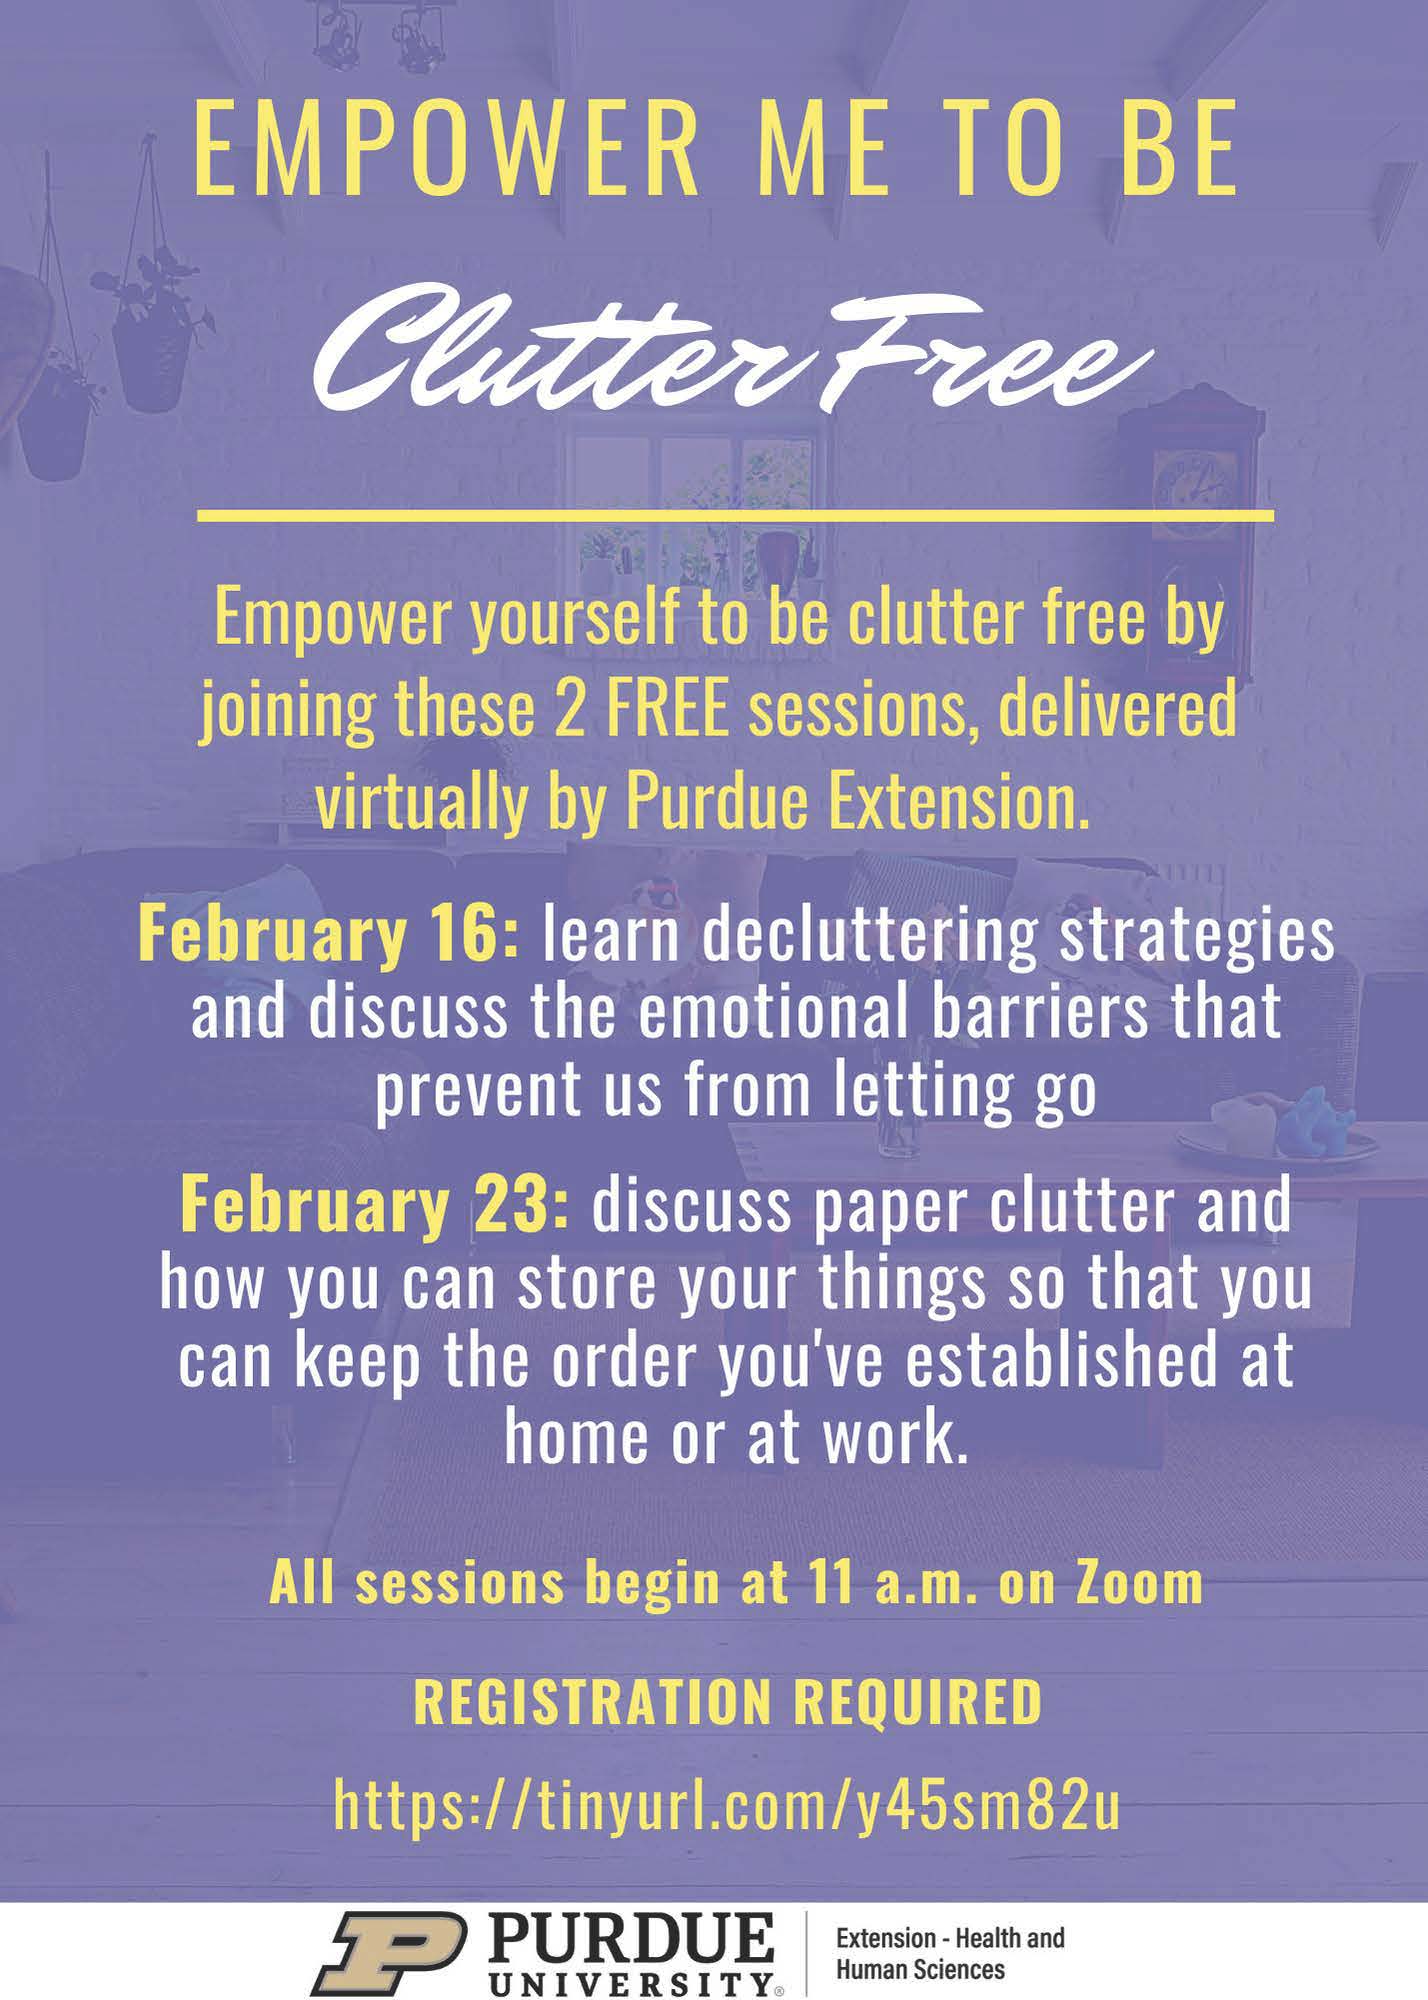 2022-feb-two-session-empower-me-to-be-clutter-free-flyer.jpg